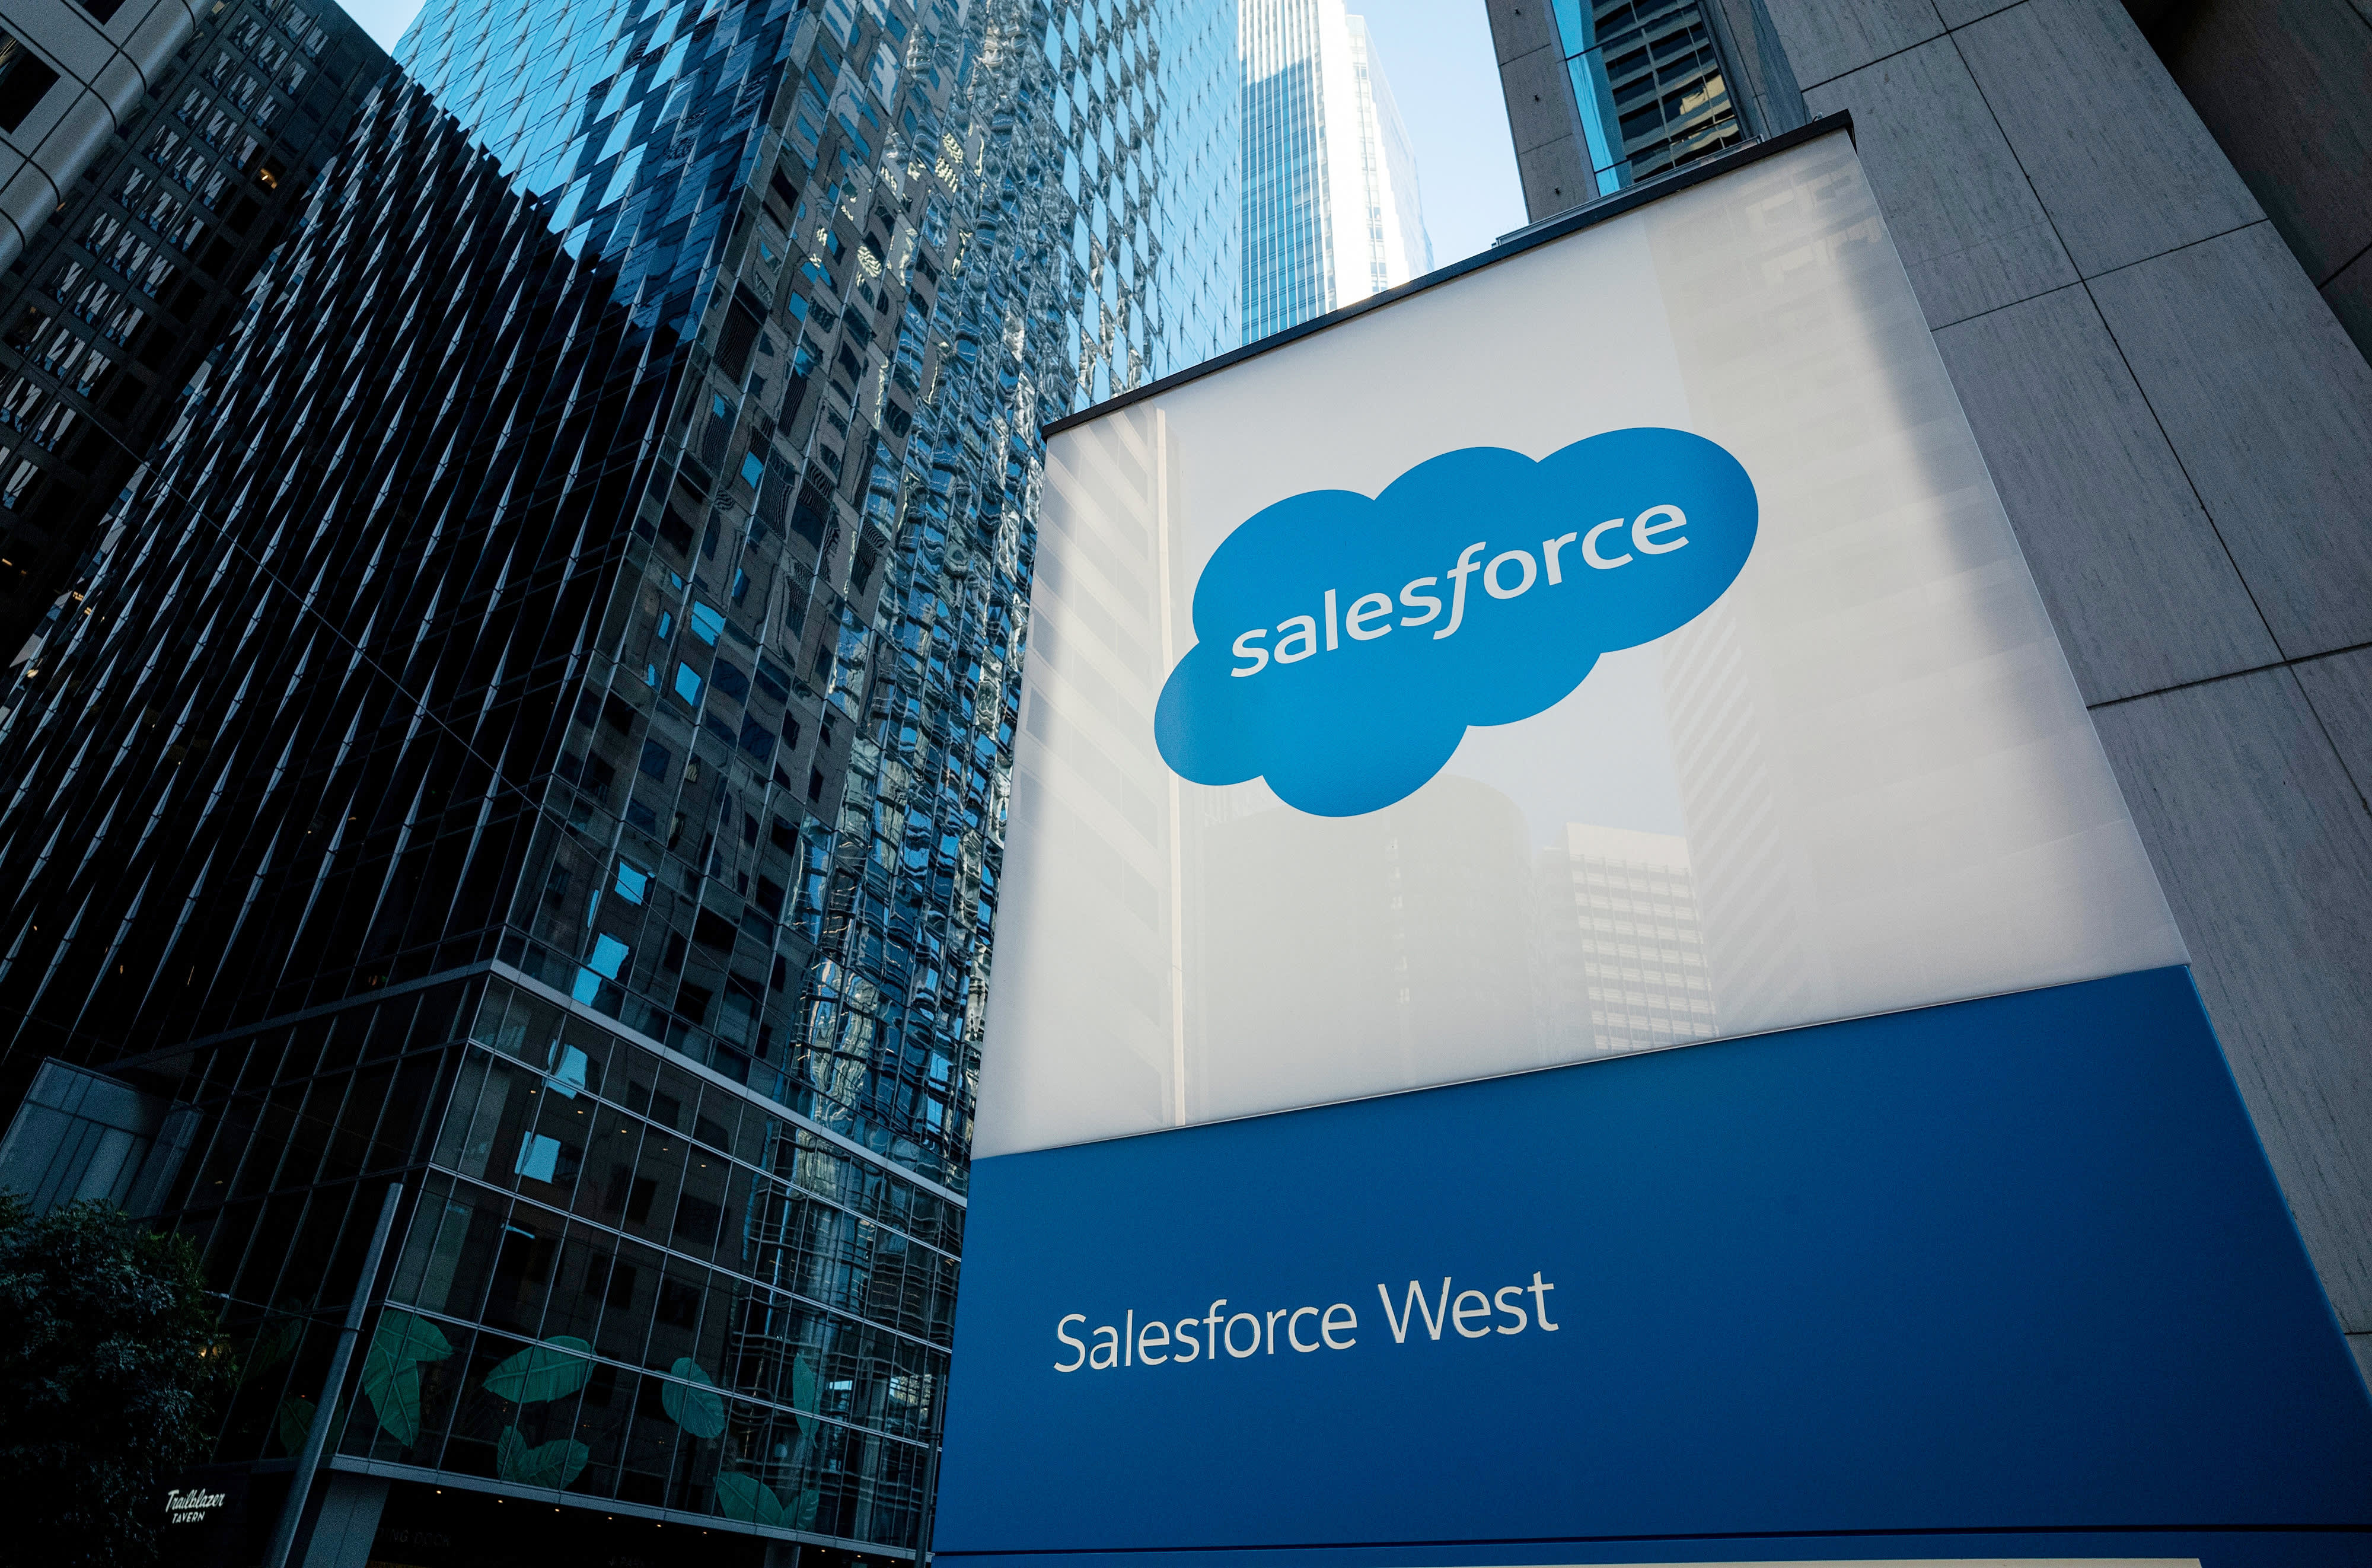 Cowen downgrades Salesforce as company adjusts to slower growth